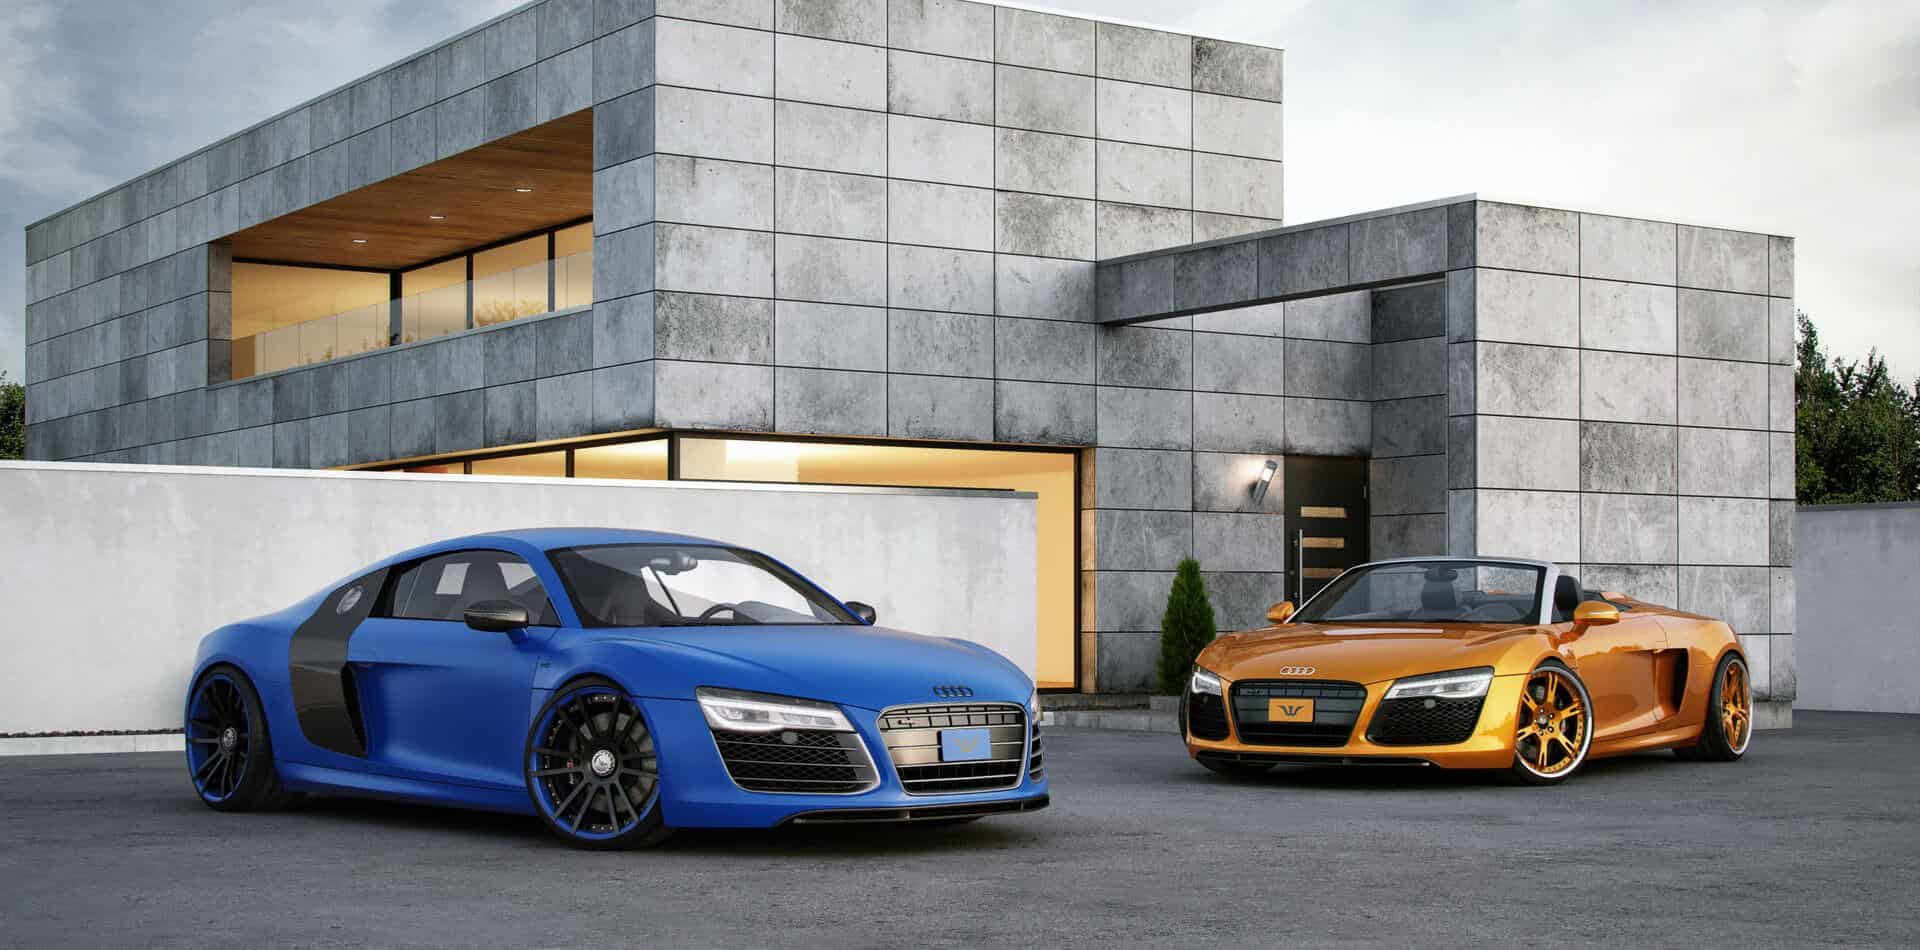 Audi R8 Tuning, wheels, exhaust and power upgrades | Wheelsandmore ...